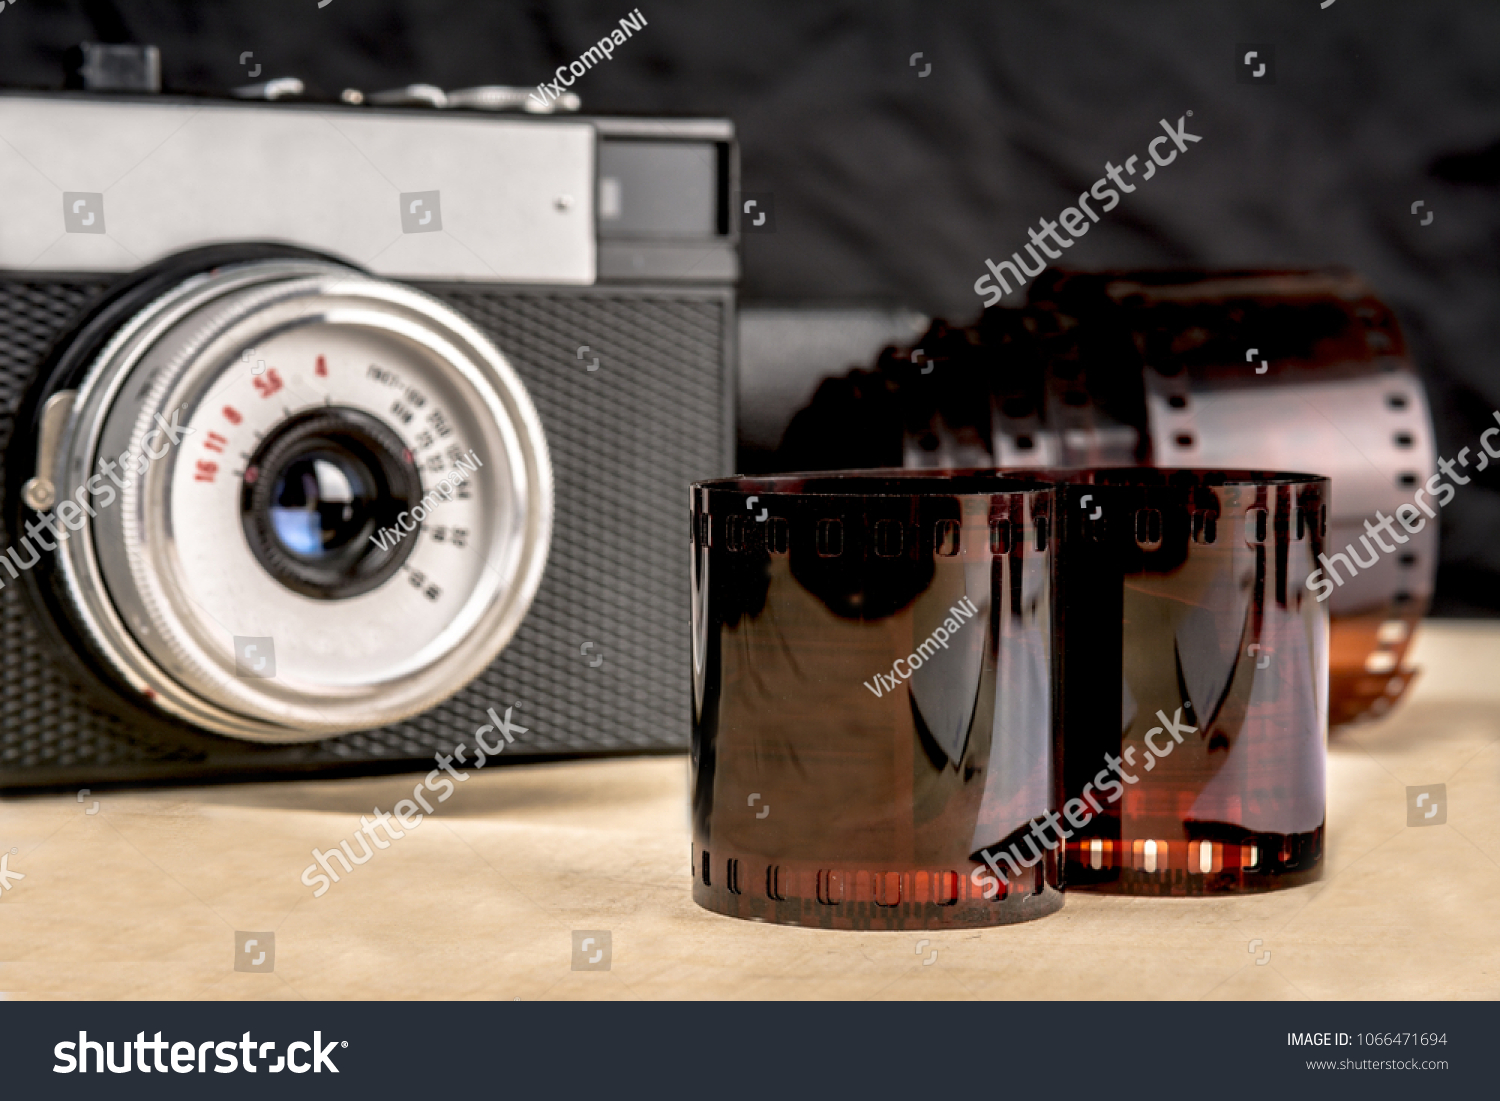 Wooden table on it a camera and a film for him #1066471694